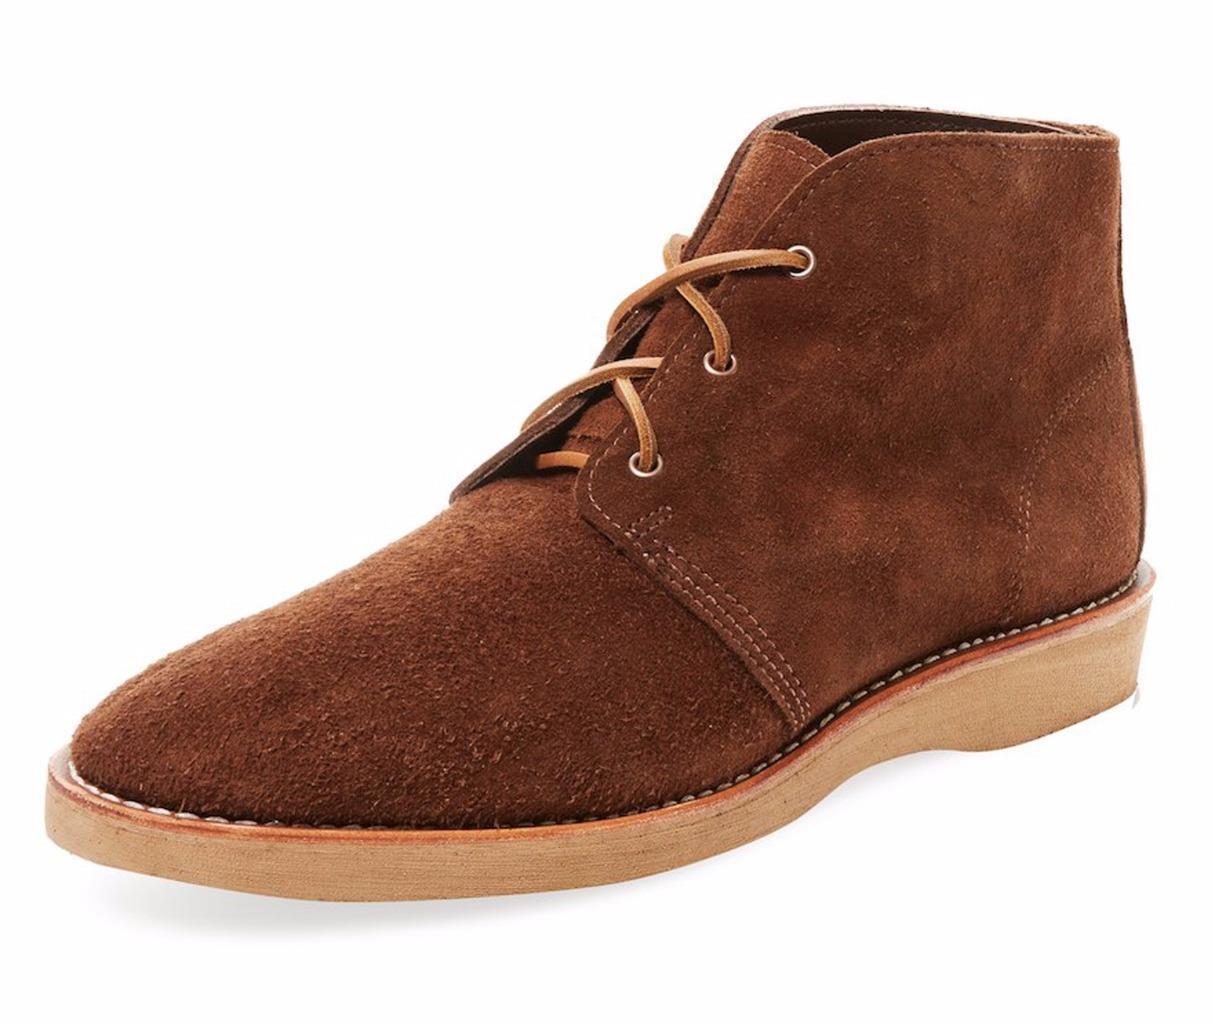 New in Box - $320 Wolverine 1000 Mile (USA) Palmer Brown Suede Boot Size 11.5 - $138.59